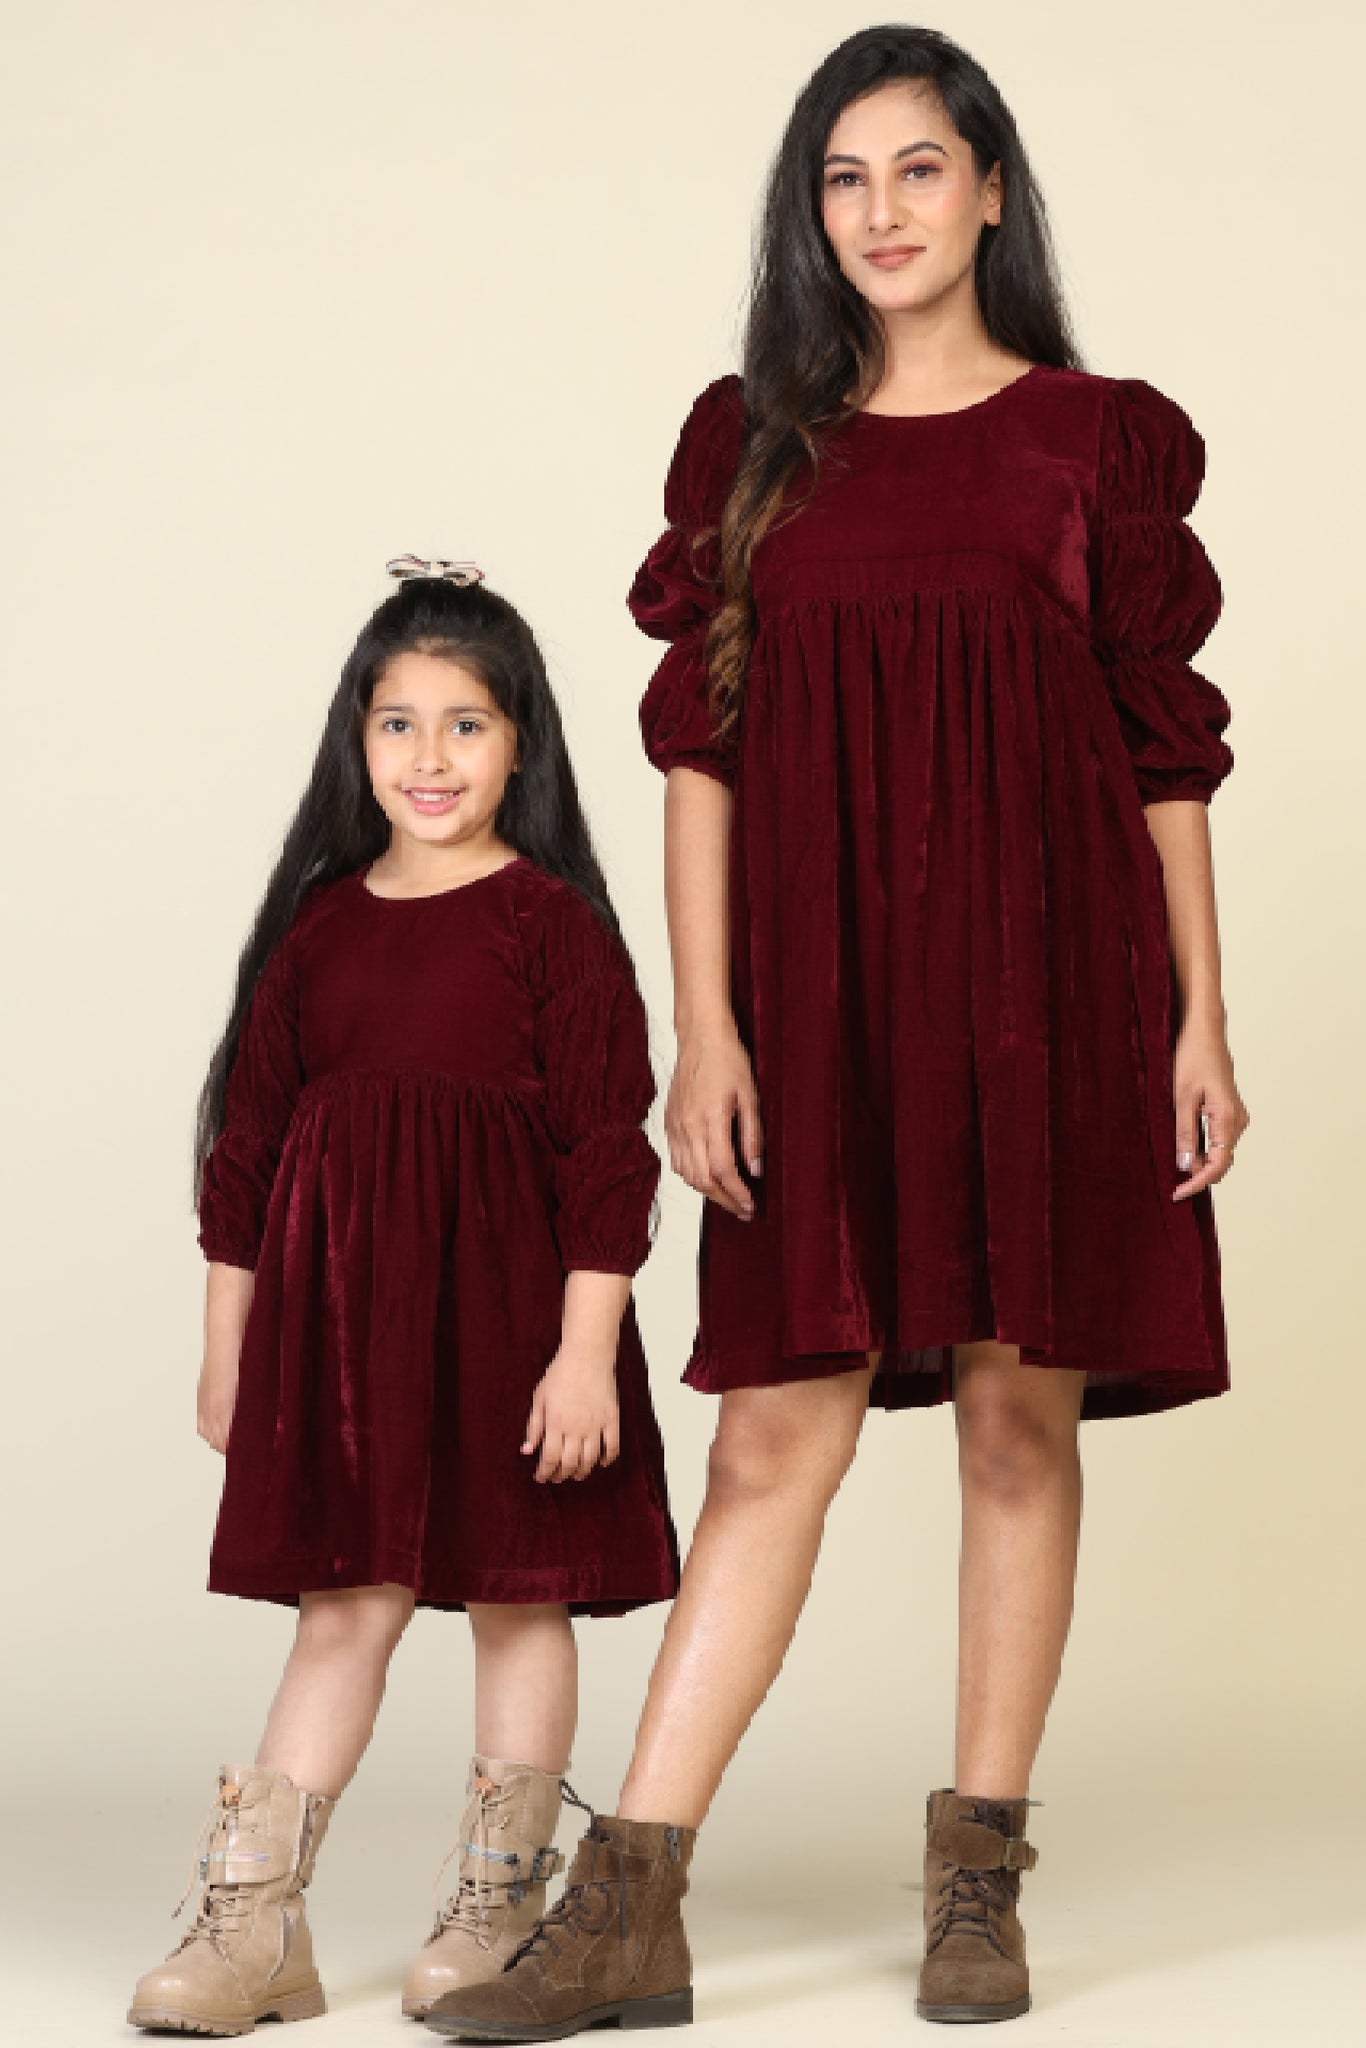 Buy Birthday Dress For Mom And Daughter Online